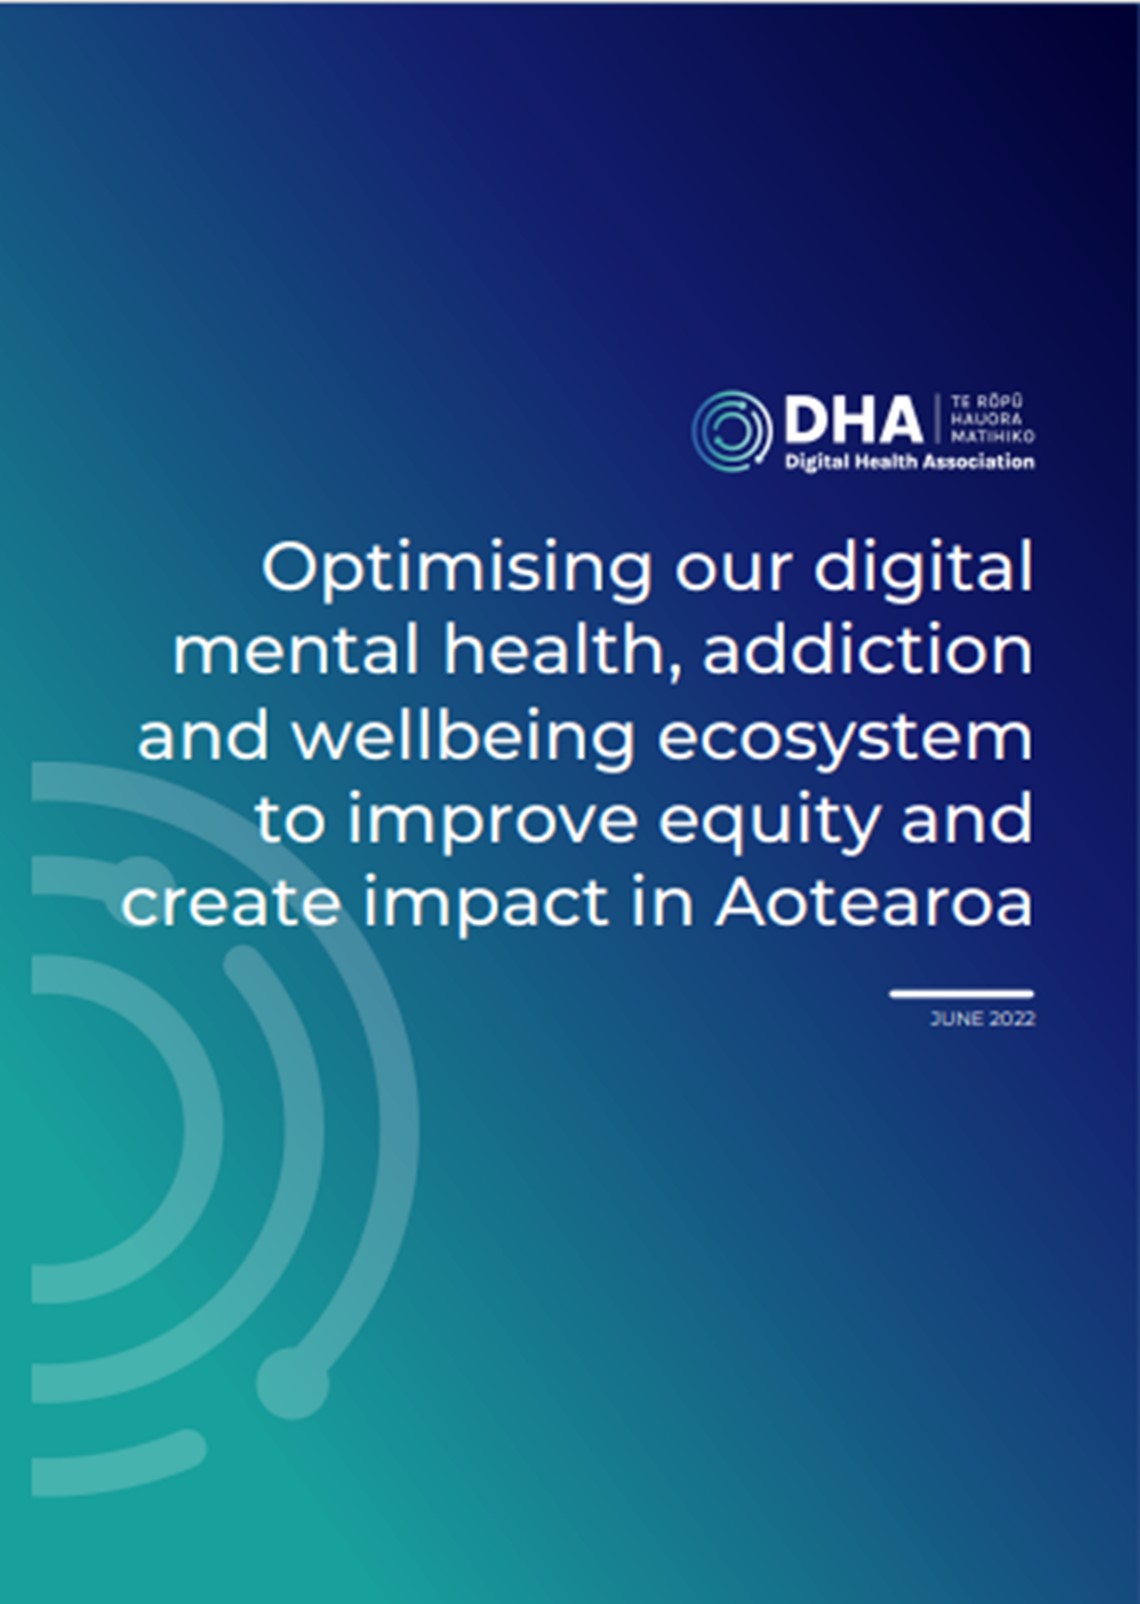 The cover of the report. The background is dark and light blue with a circle motif. The text says optimising our digital mental health, addiction, and wellbeing ecosystem to improve equity and create impact in Aotearoa